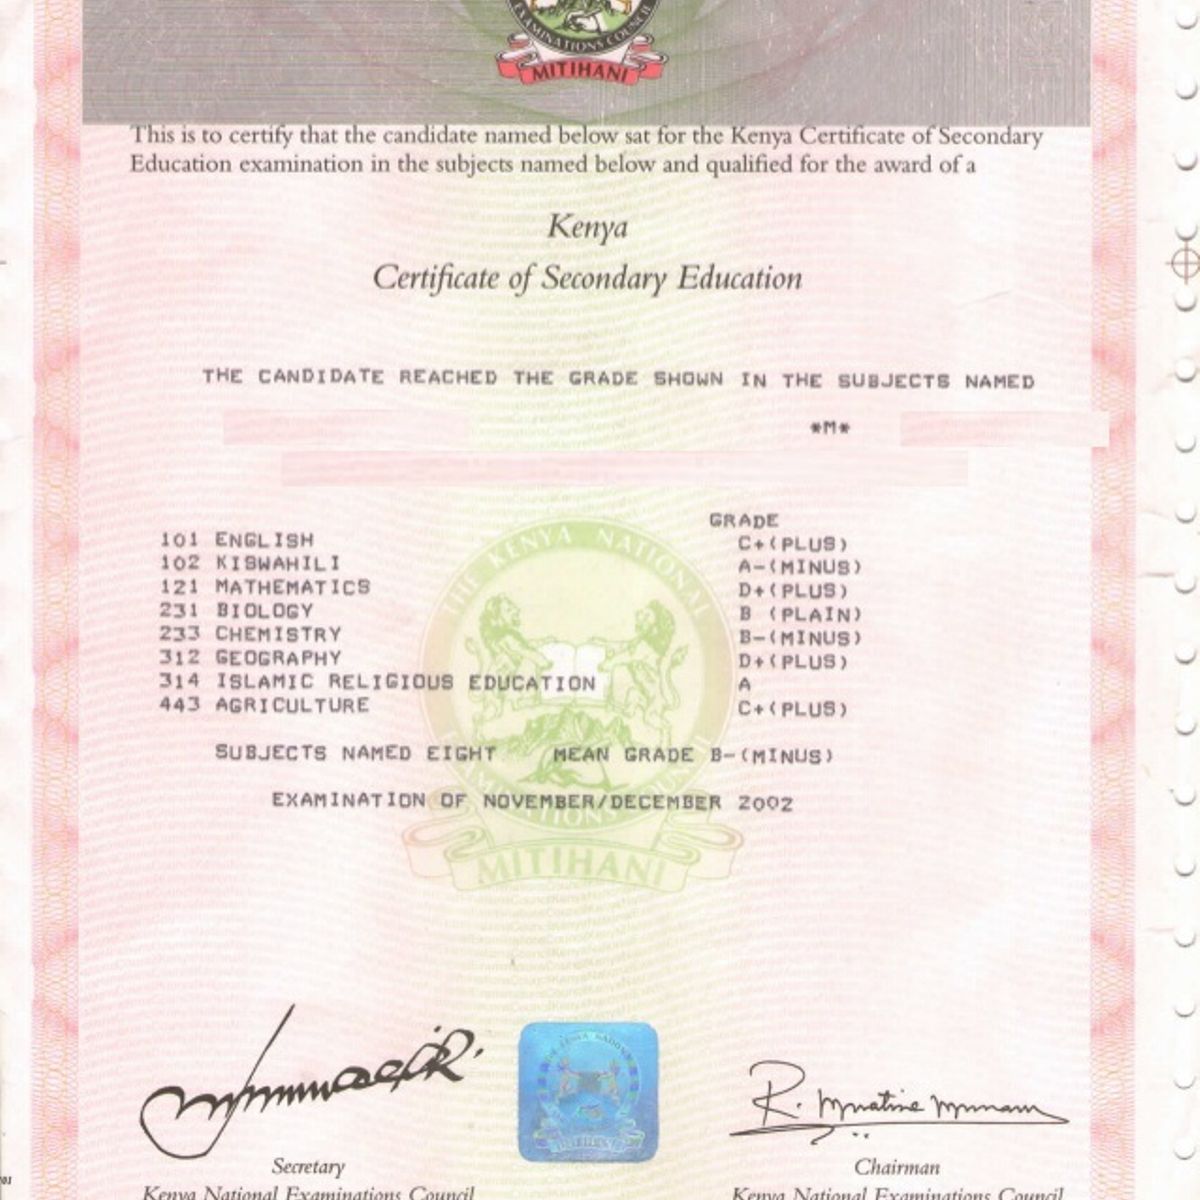 How to identify a fake KCSE certificate